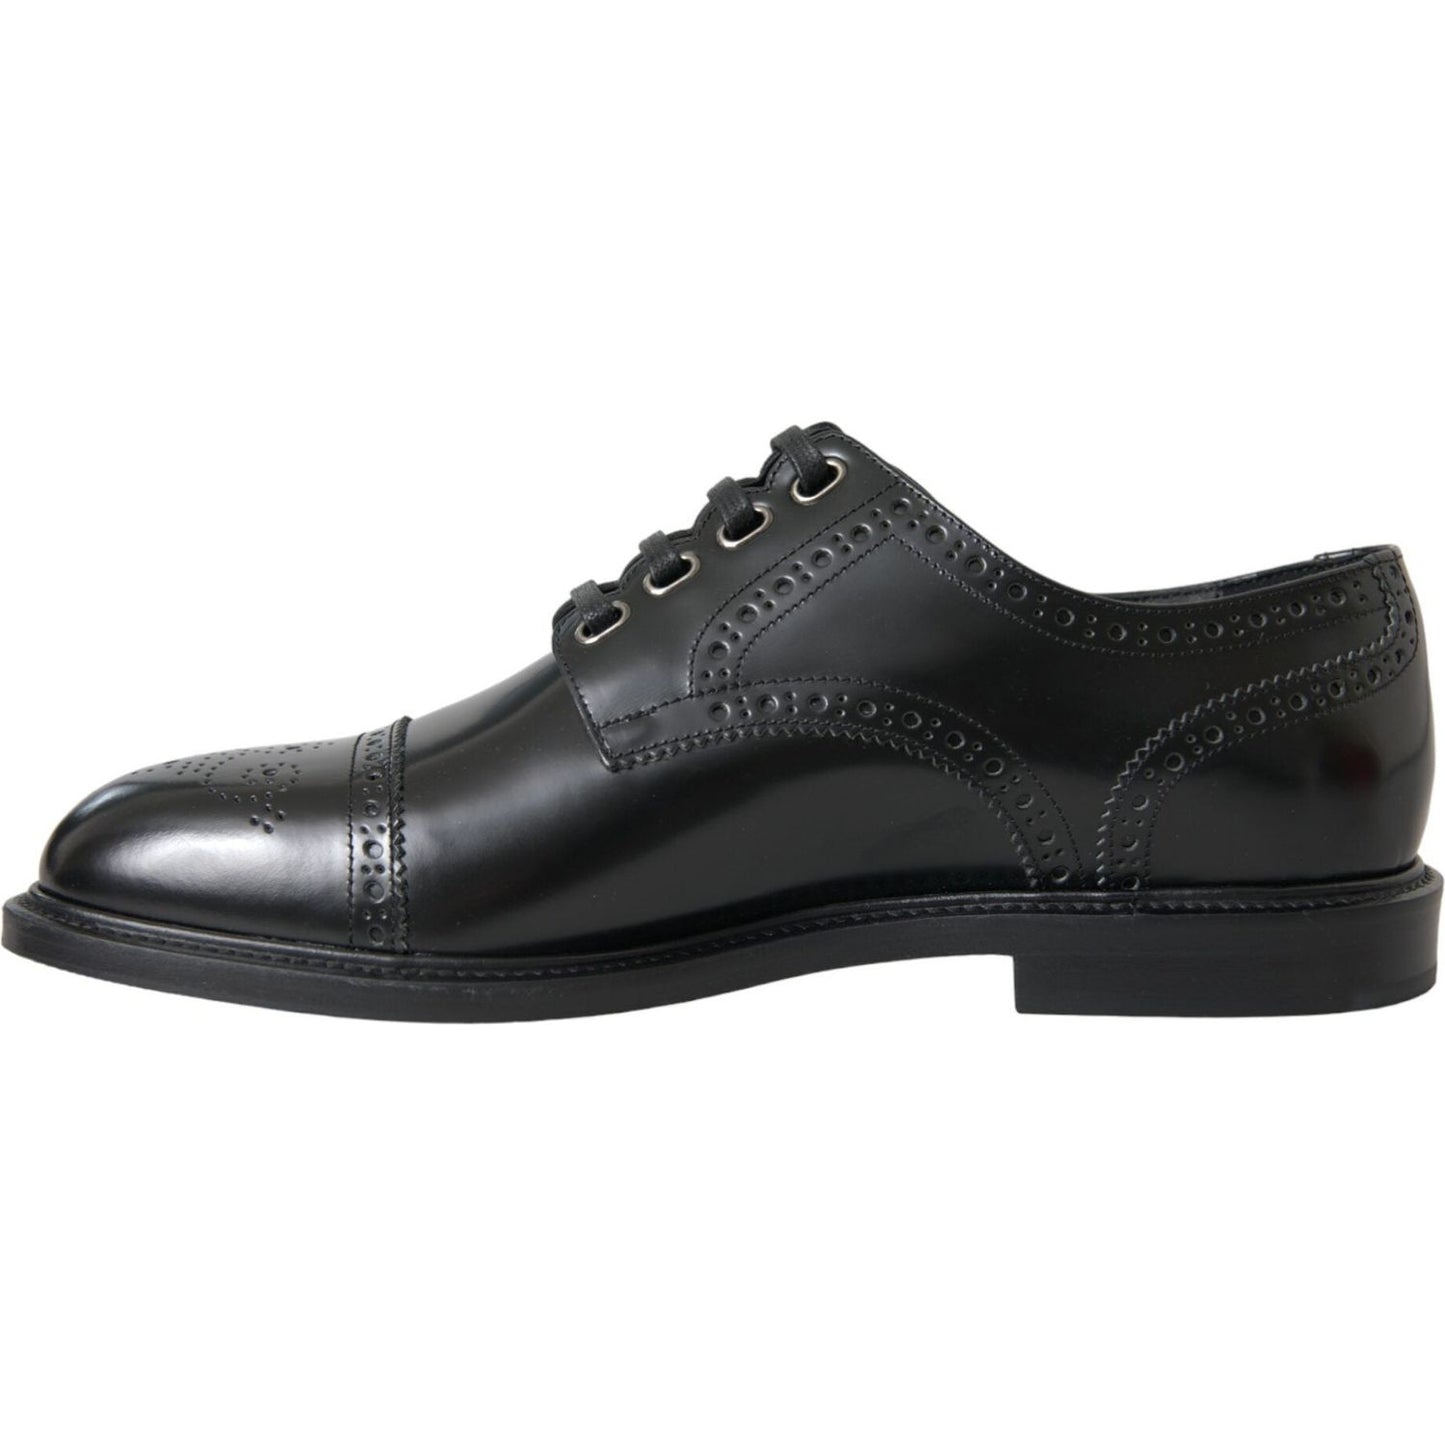 Black Leather Oxford Wingtip Derby Shoes Dolce & Gabbana